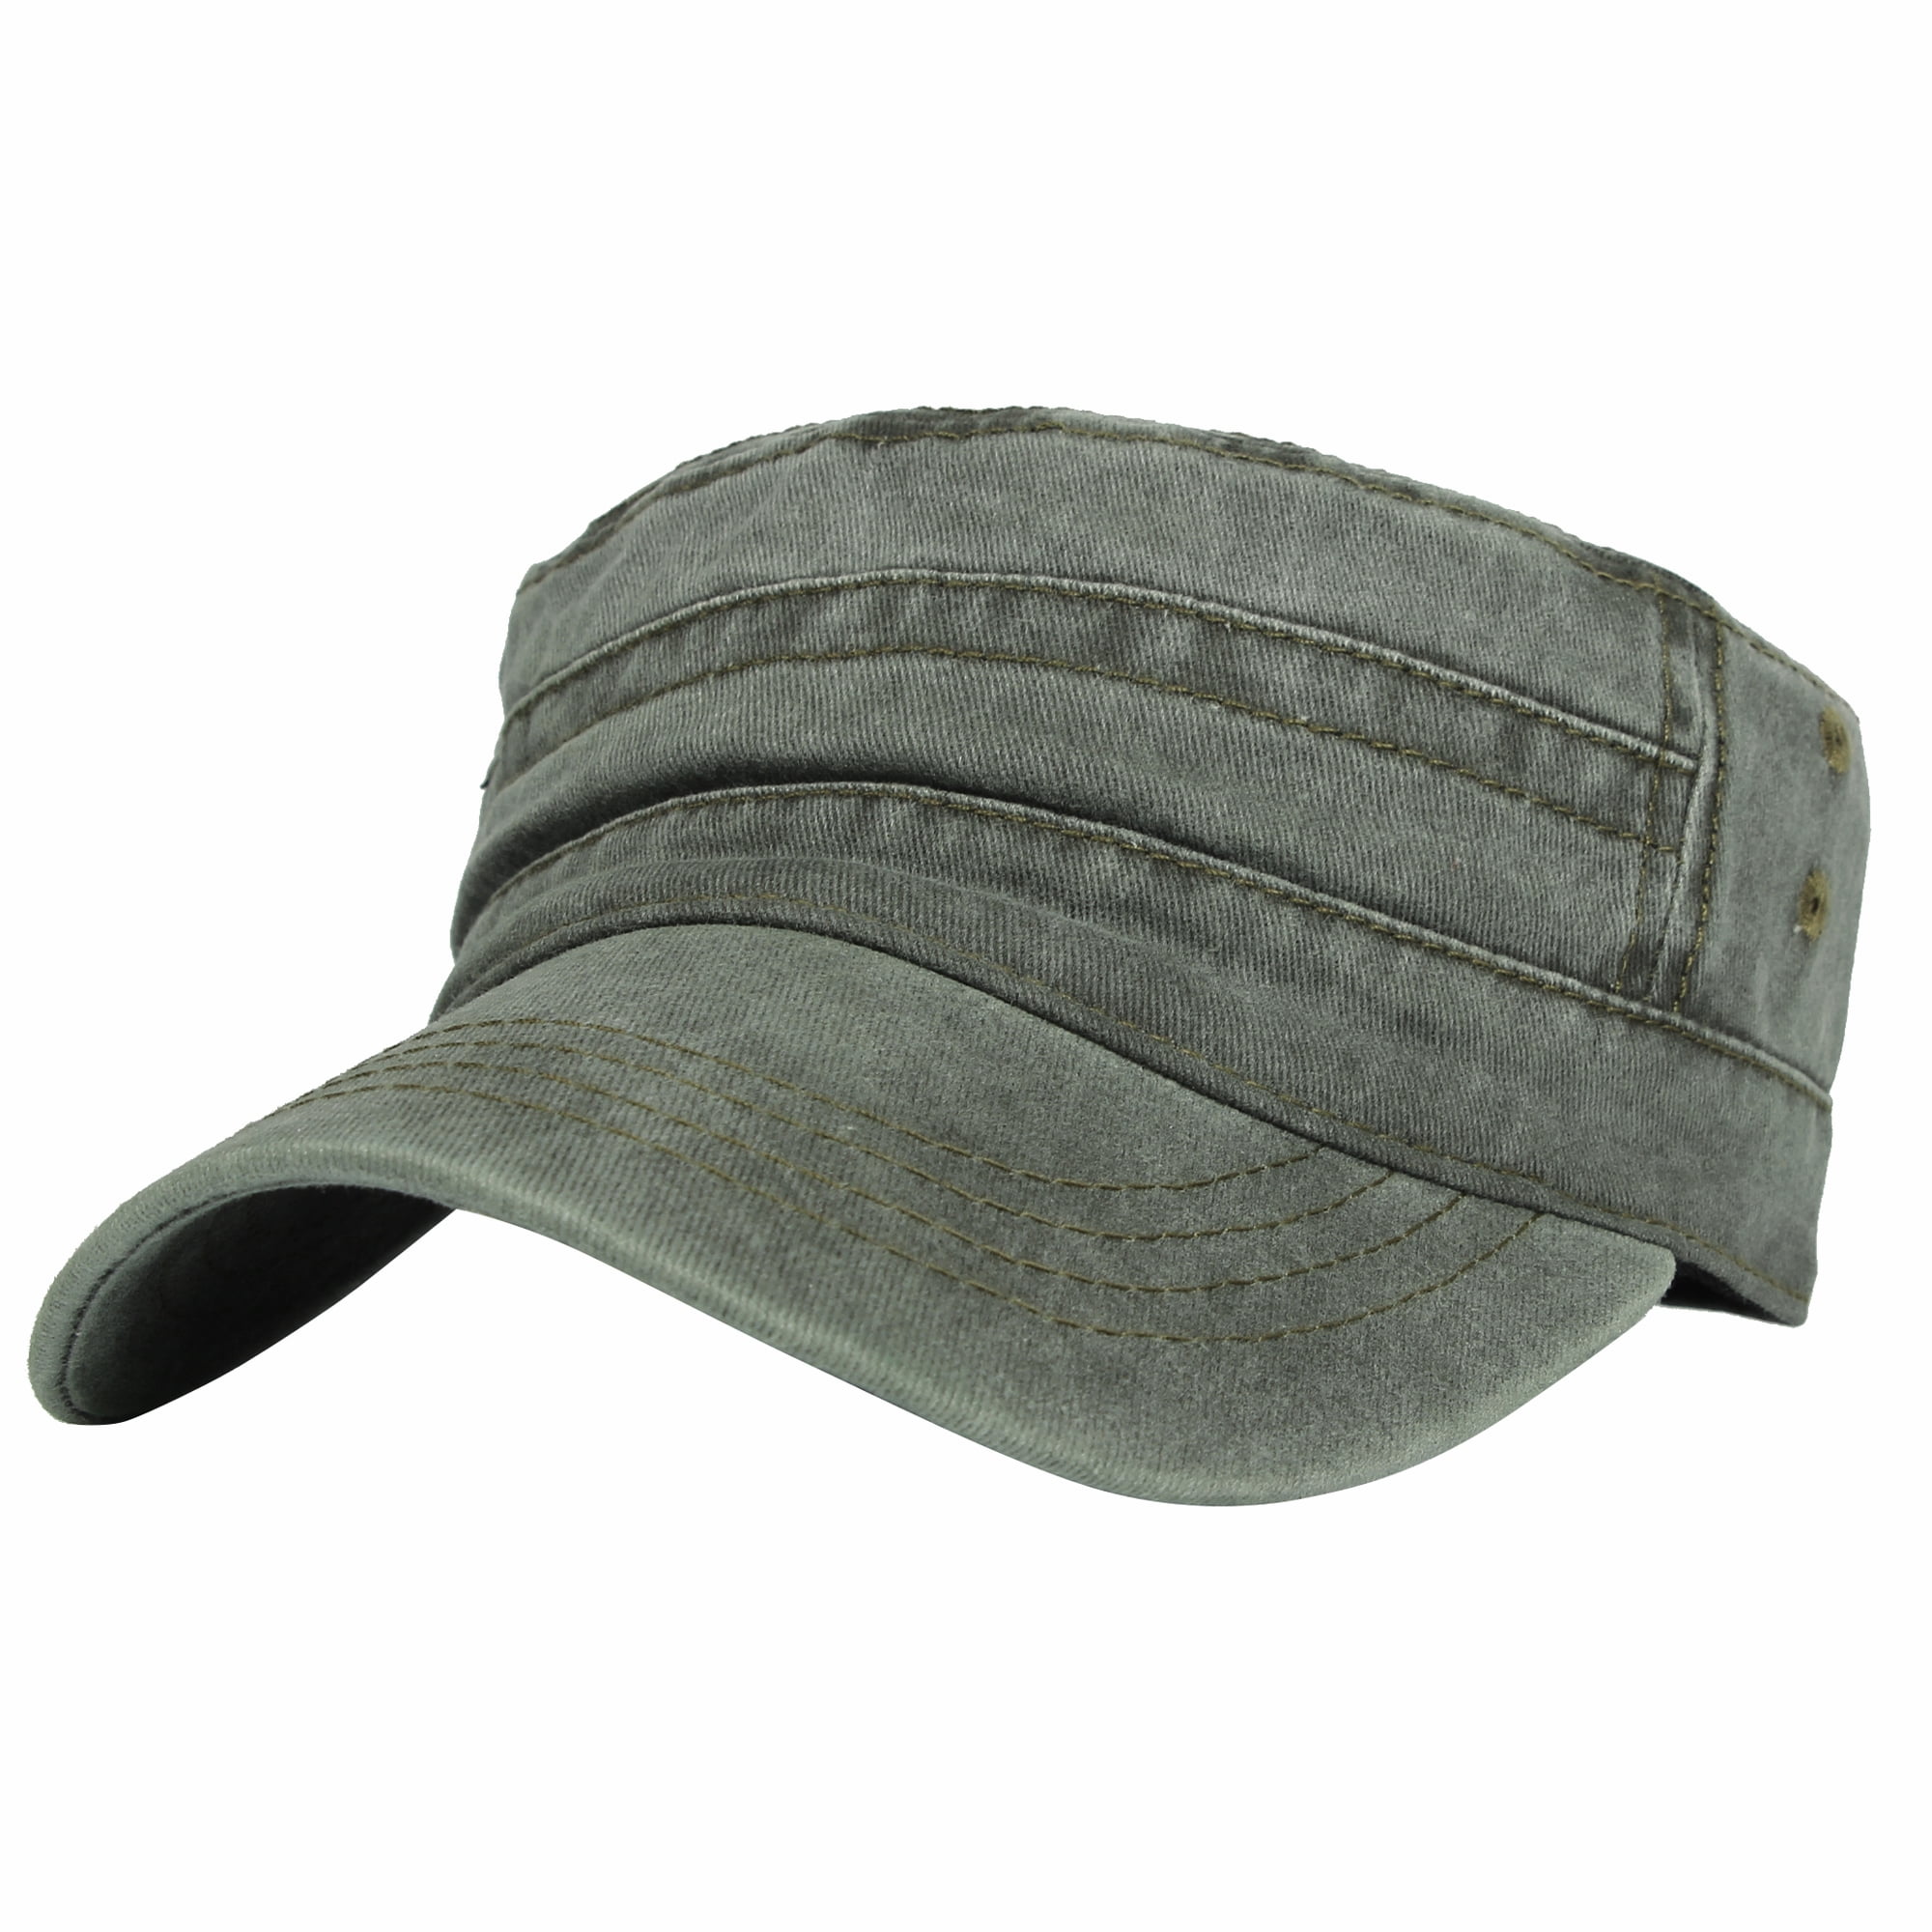 WITHMOONS Flat Top Washed Baseball Cap Military Style Cadet Hat 